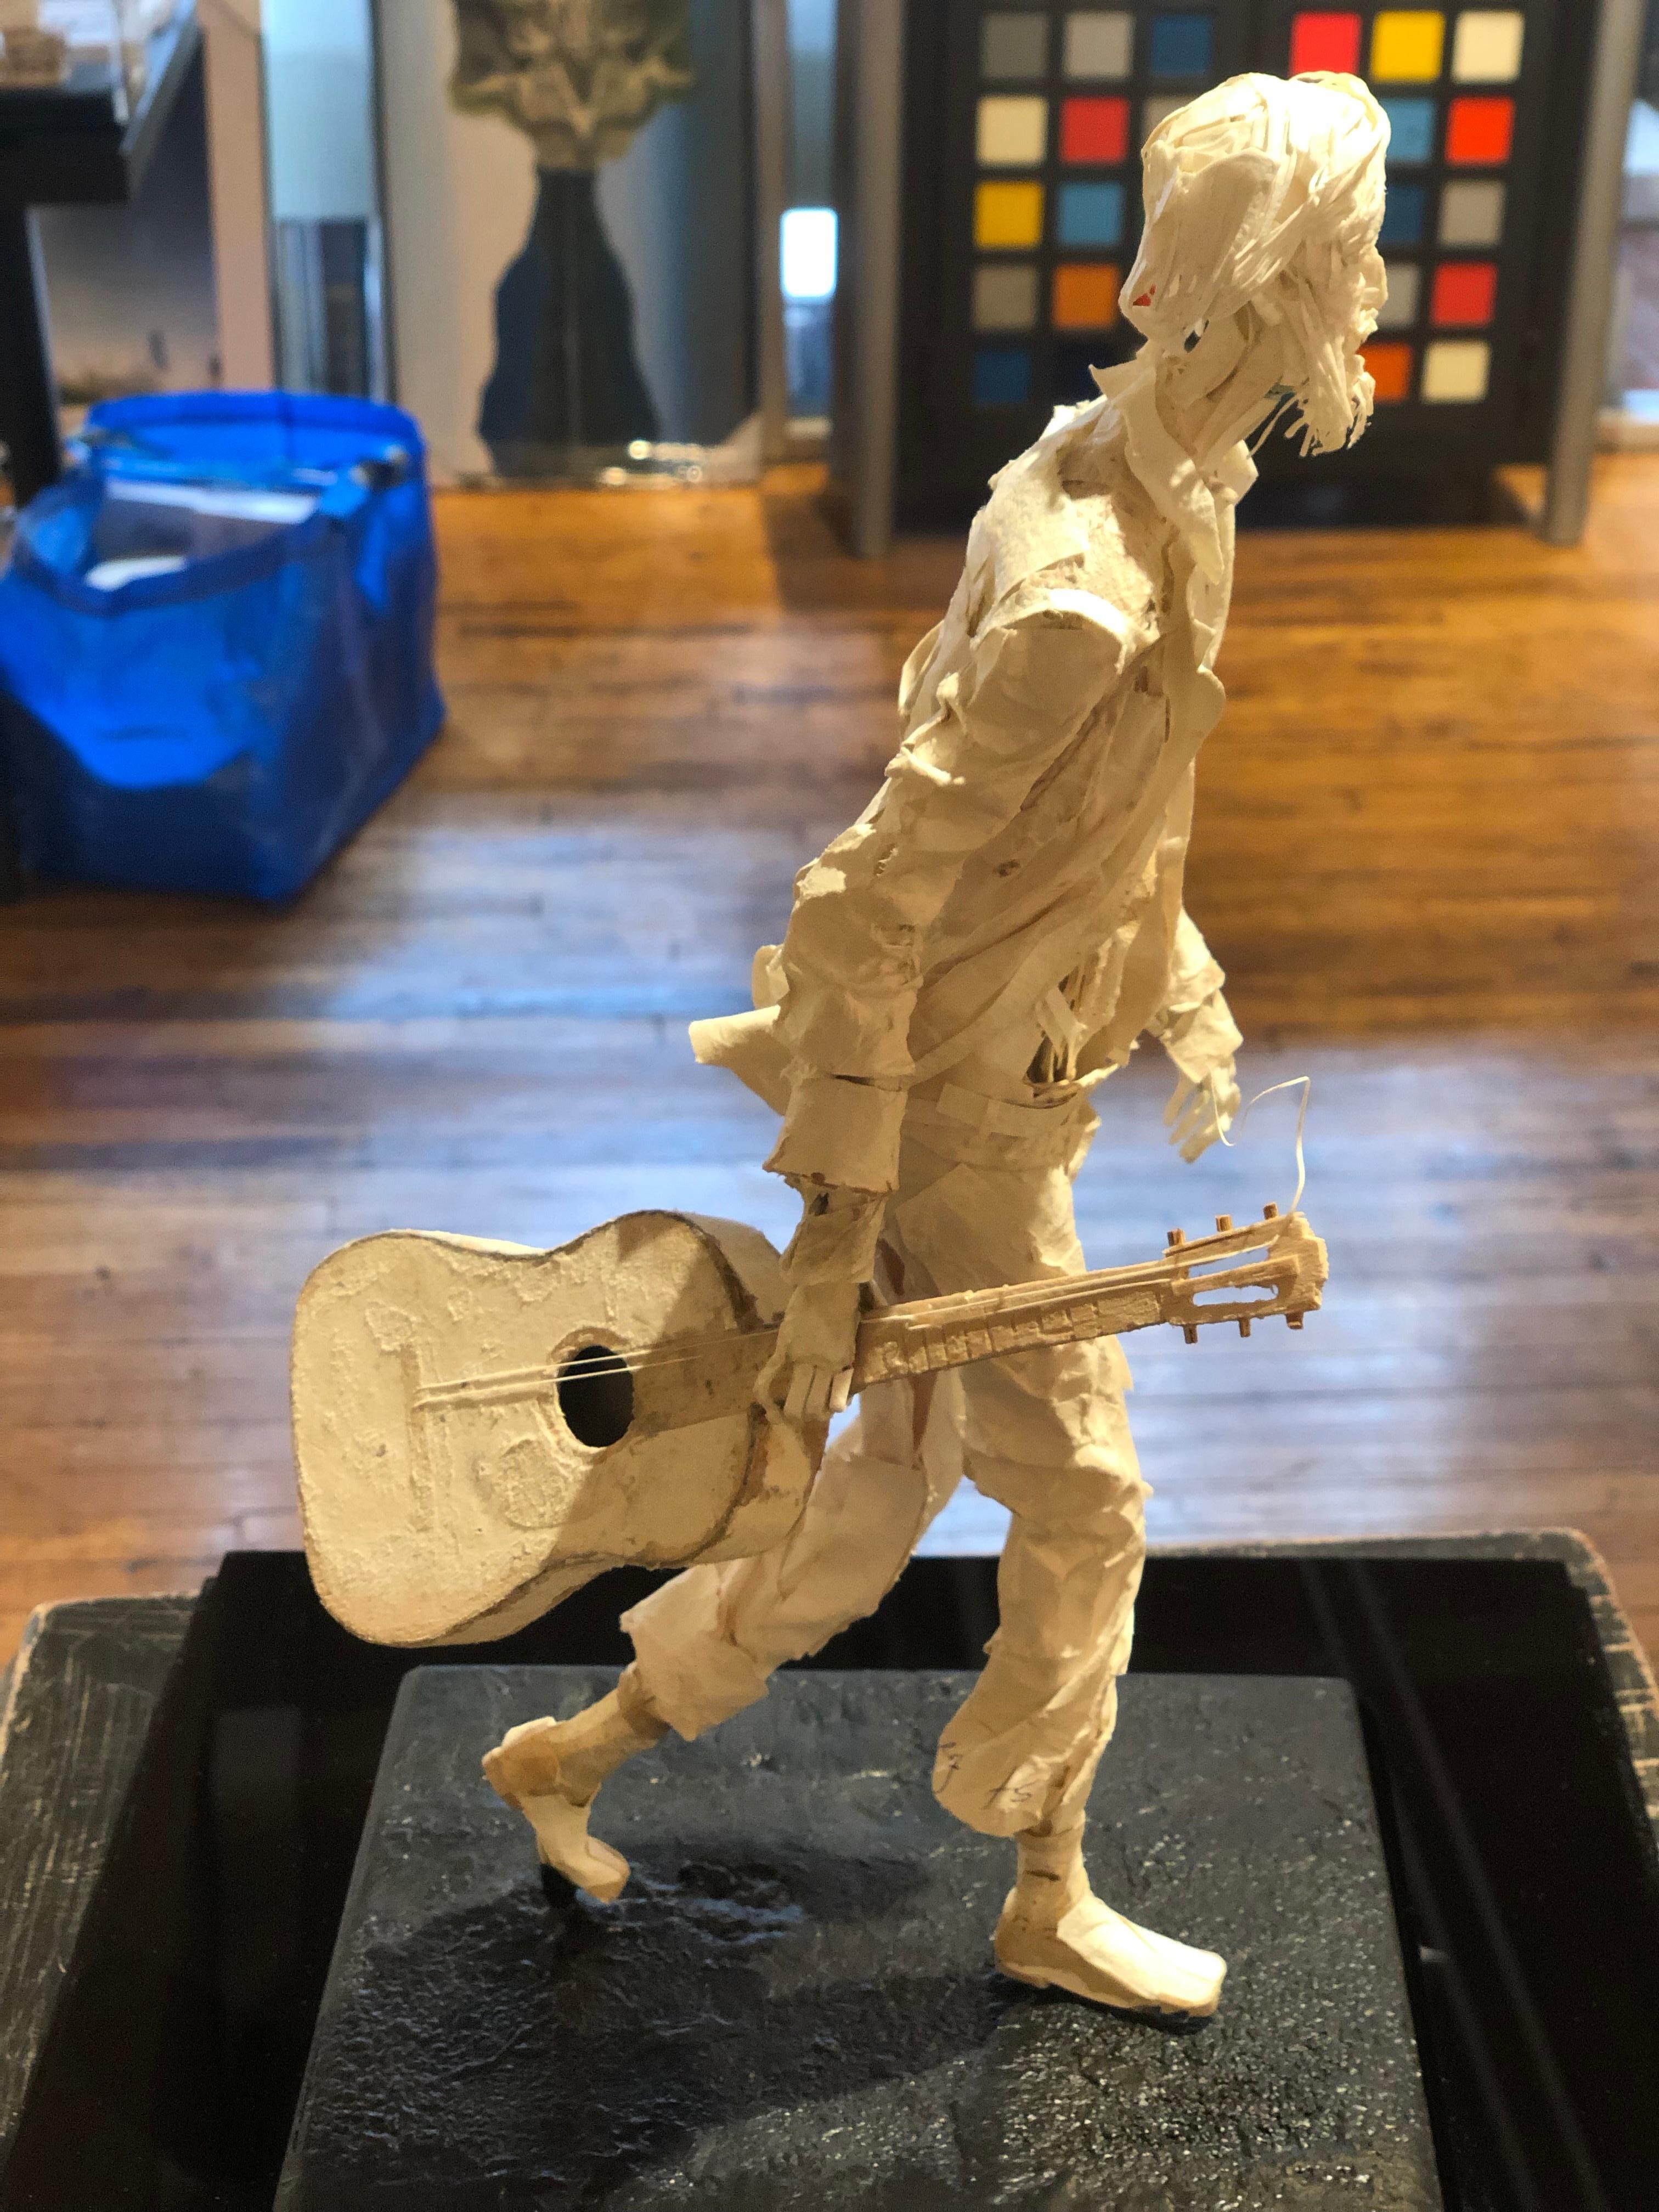 This realistic sculpture is created from scraps of paper and glue.  The sculpture is inspired by the characters found in cities around the world.  In this case, a street musician walks with his guitar.  The artist captures perfectly, the movement of